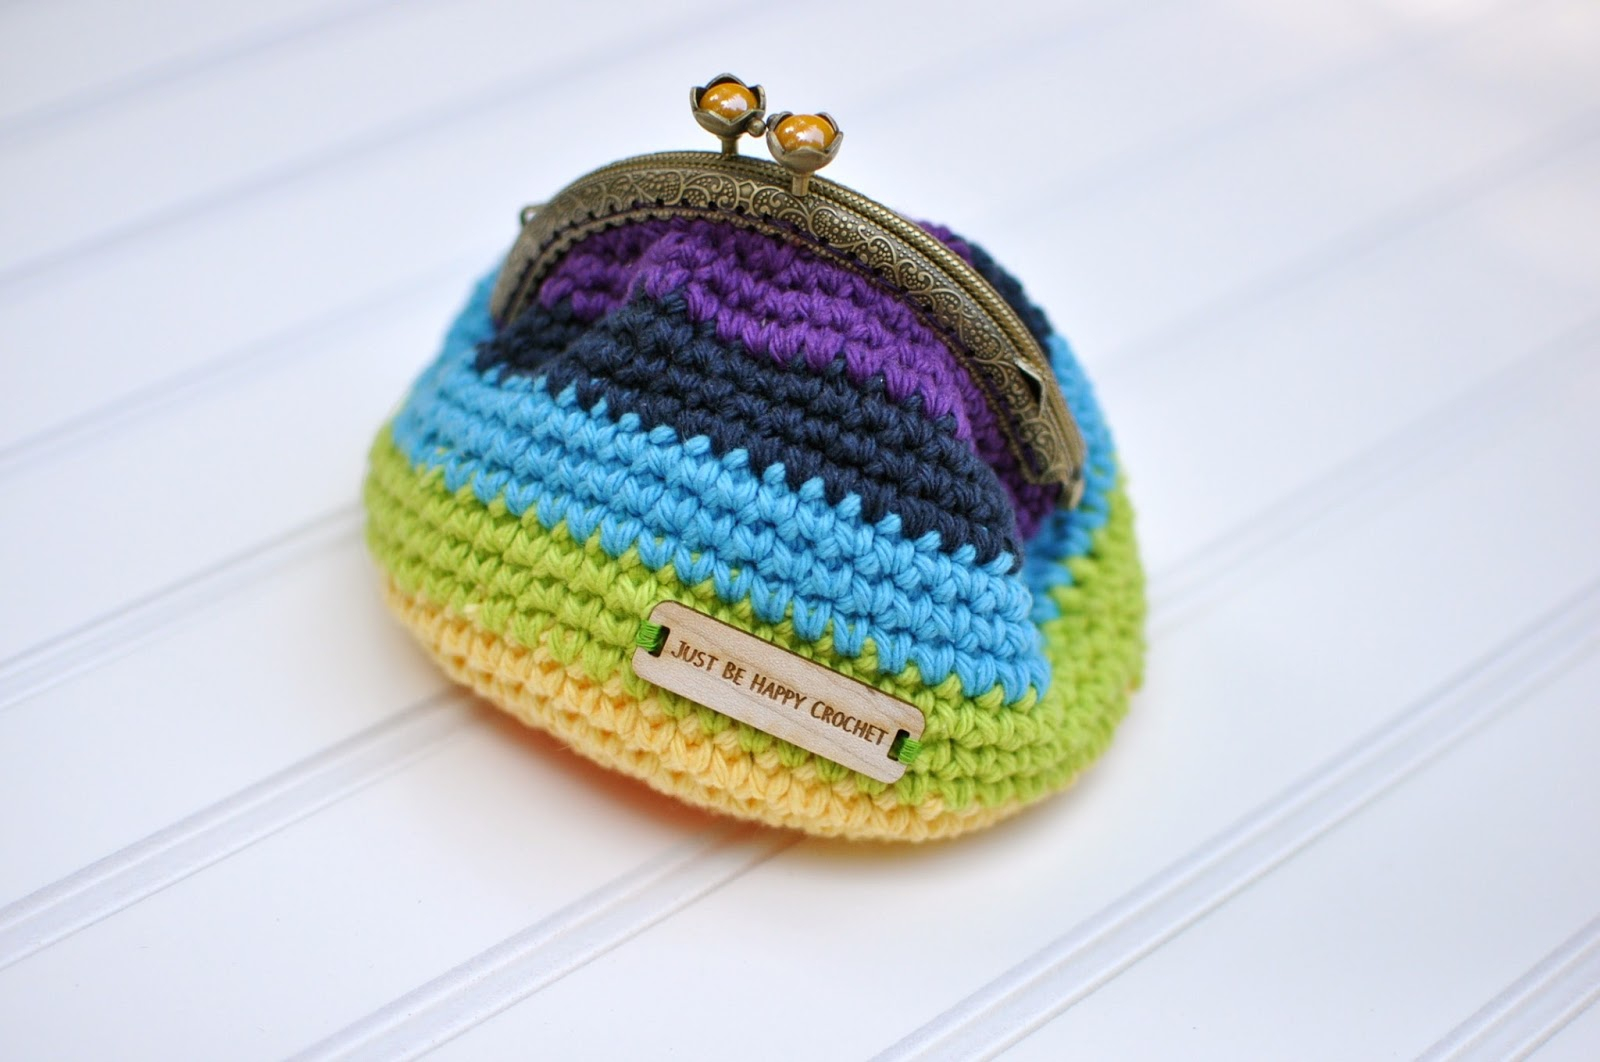 Crochet Purse Patterns Just Be Happy Coin Purse Free Pattern